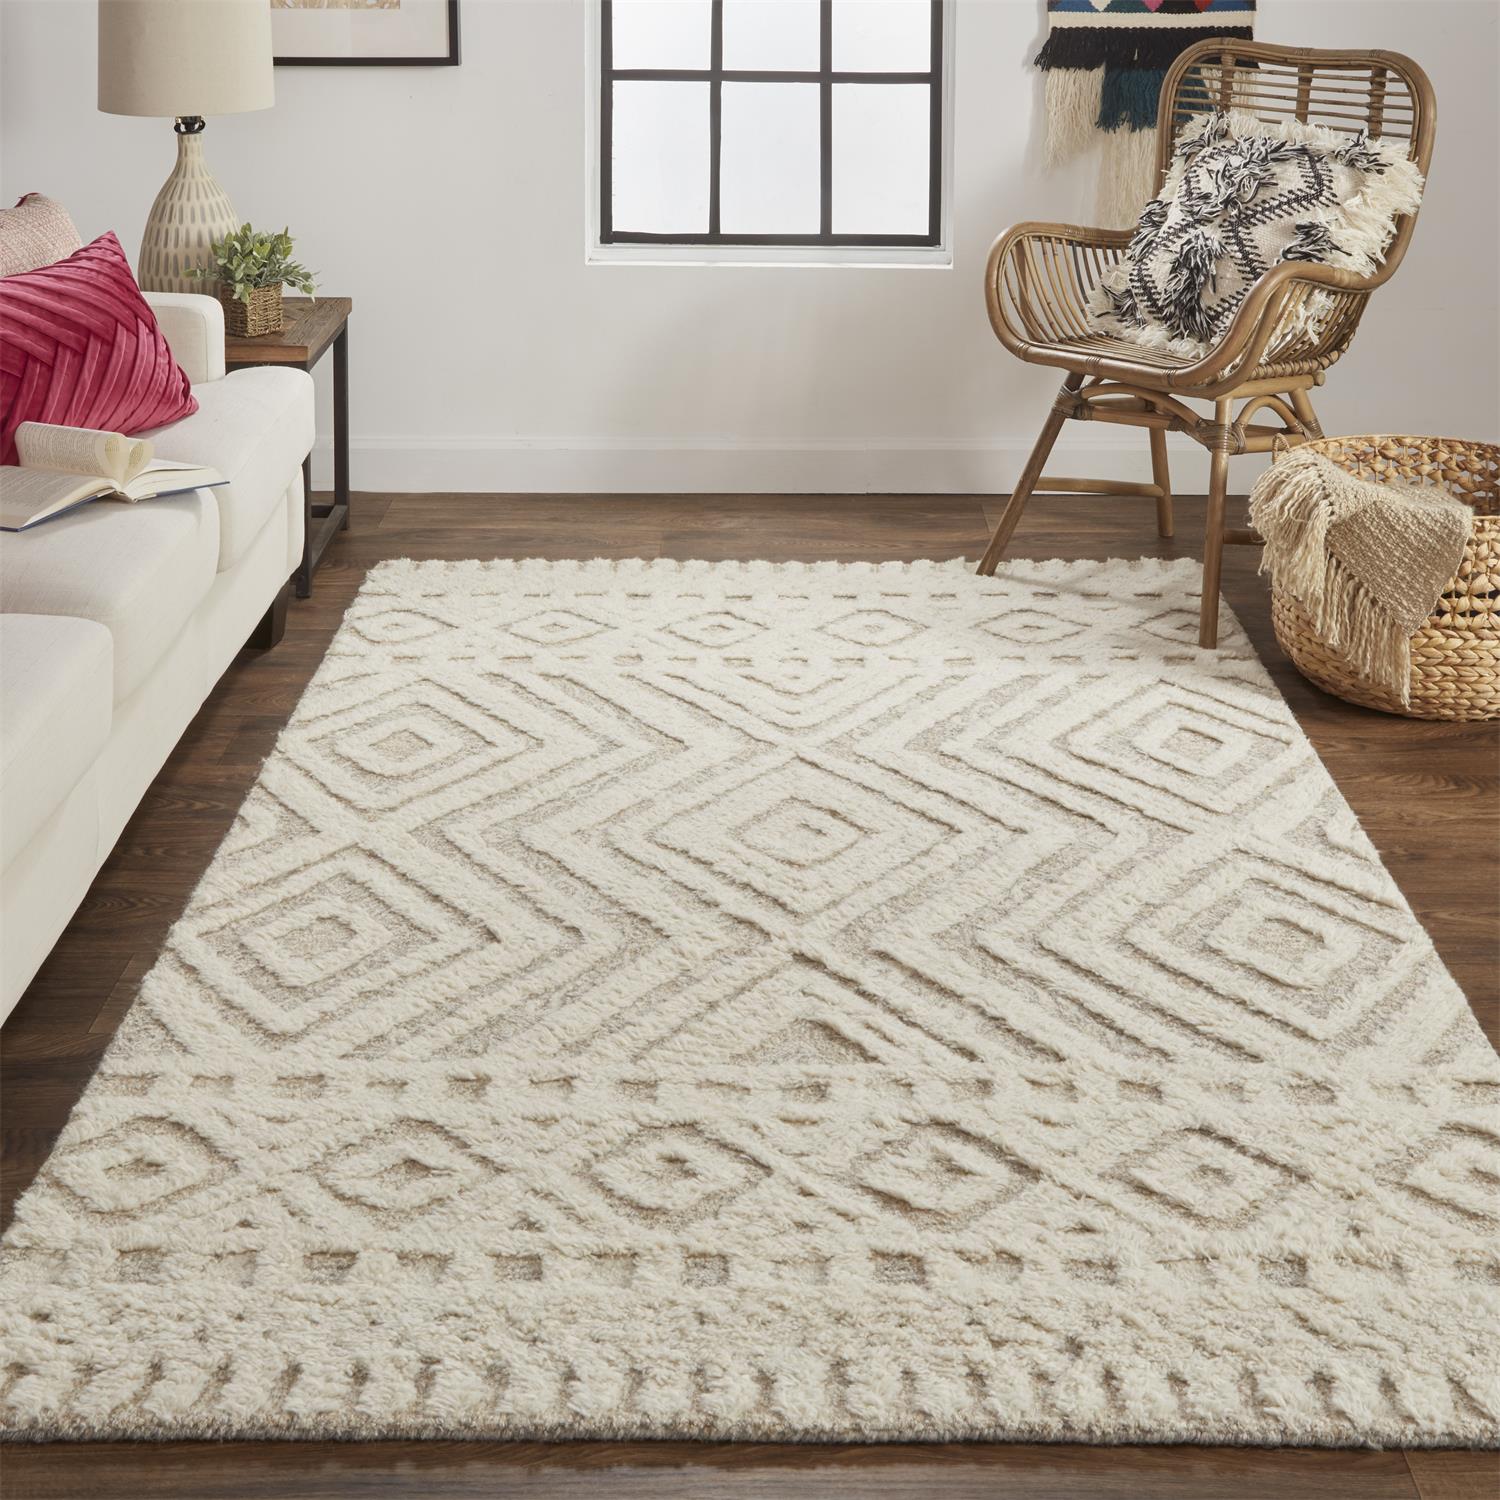 Exotic Orchid SW2314 Carpet, Area Rug, Large Floor Mat For Living Room  Bedroom Playroom